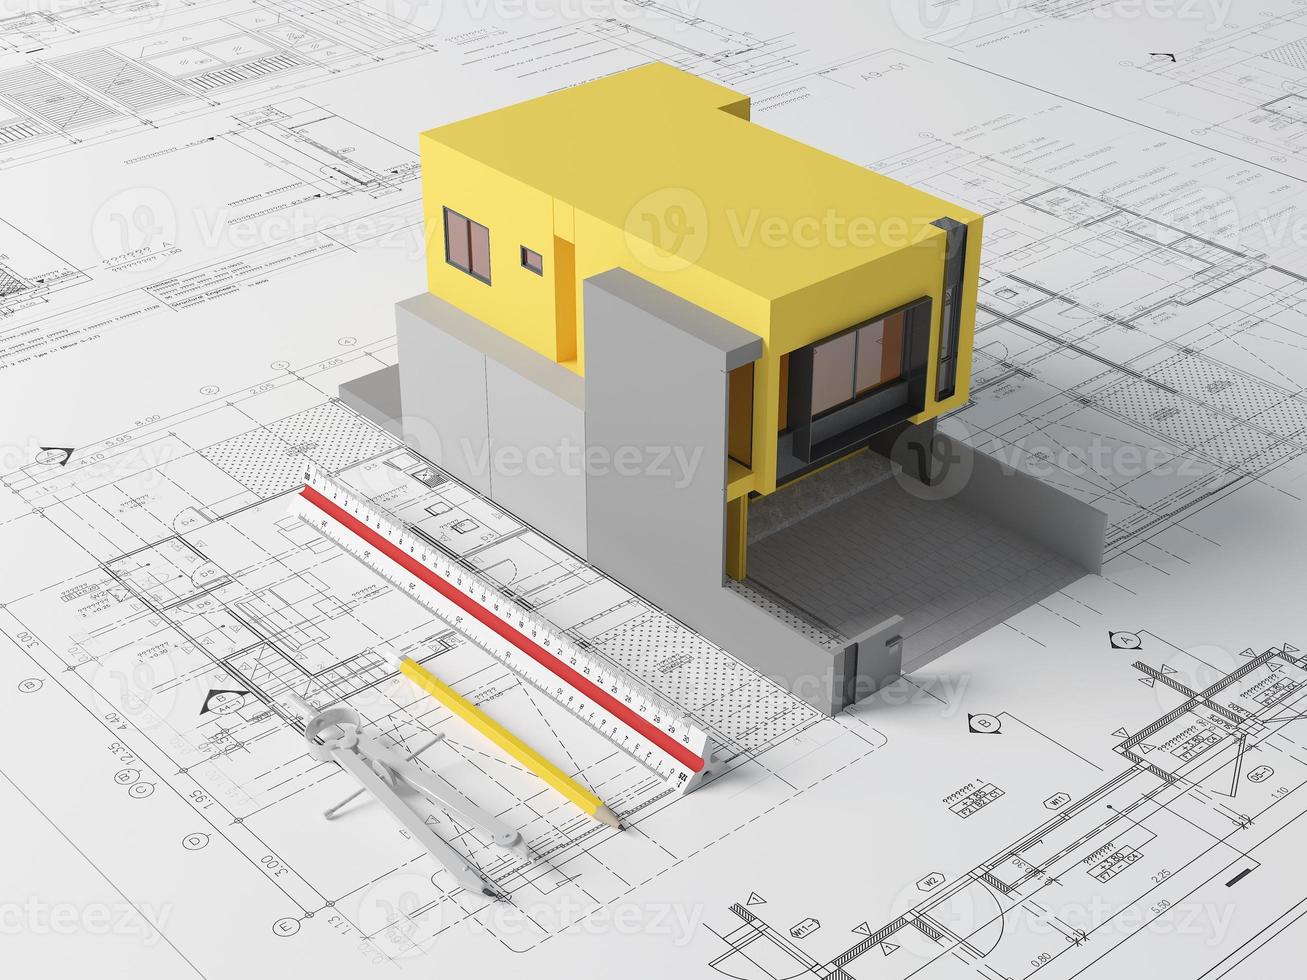 Blueprint plans and yellow house model with scale ruler,compass and pencil.Architect concept.3d rendering photo